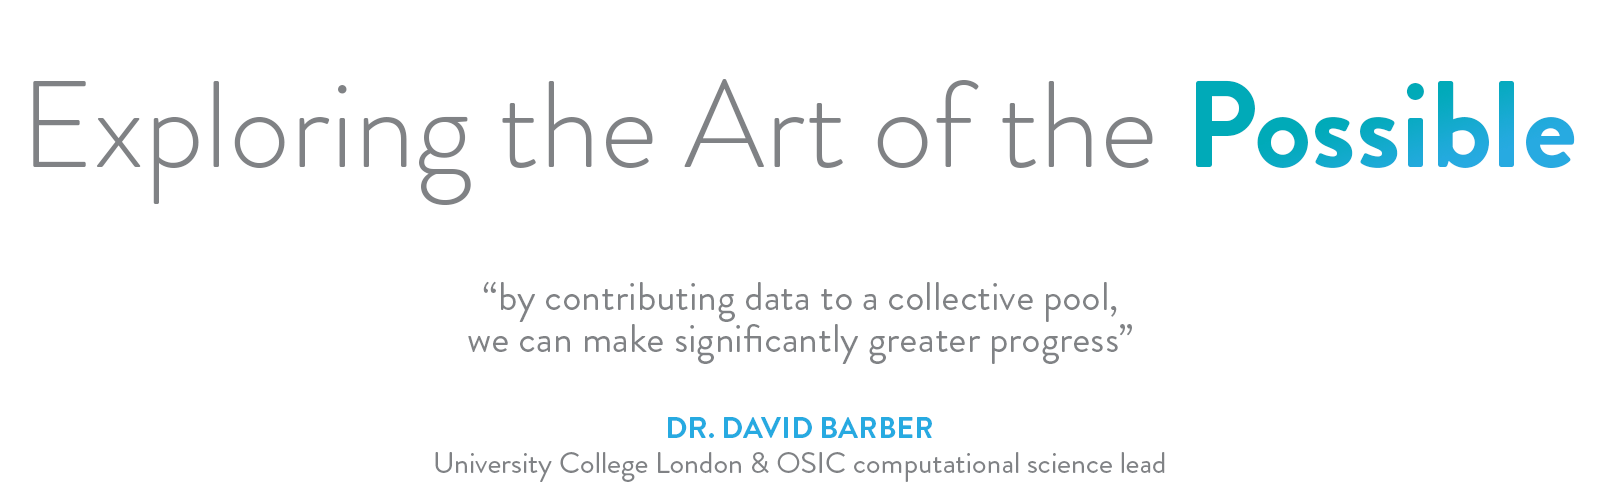 Exploring the Art of the Possible. Quote by Dr. David Barber (university College London & OSIC computational science lead) 